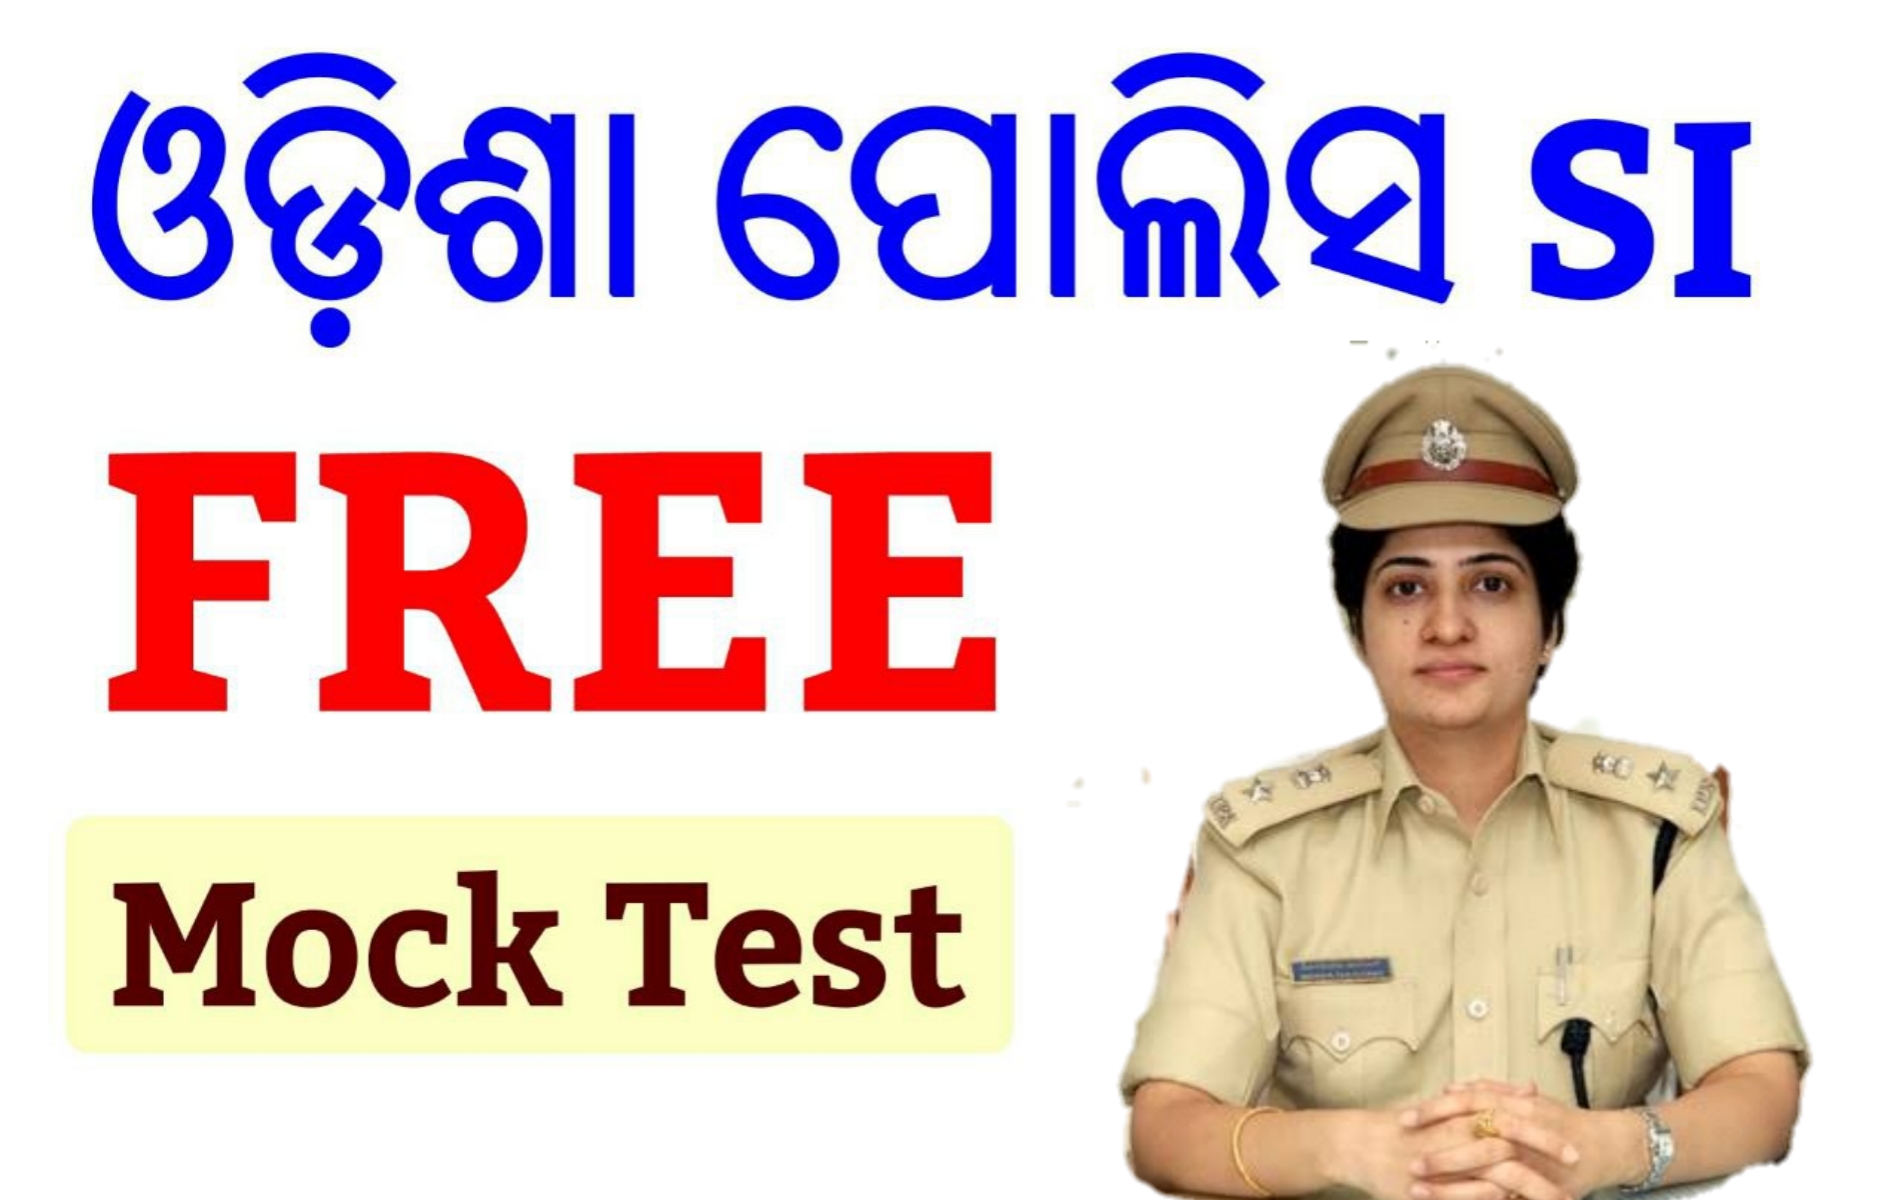 W- OSSSC RI, Forester, Forest Guard, LSI, ARI, AMIN, Anganwadi Supervisor 2024 !! (Pre + Mains Exam) E-BOOK (PDF) 25,000 BEST MCQ !! CHAPTER WISE LAST 5 Years OSSSC, OSSC, OPSC ALL QUESTIONS & ANSWER